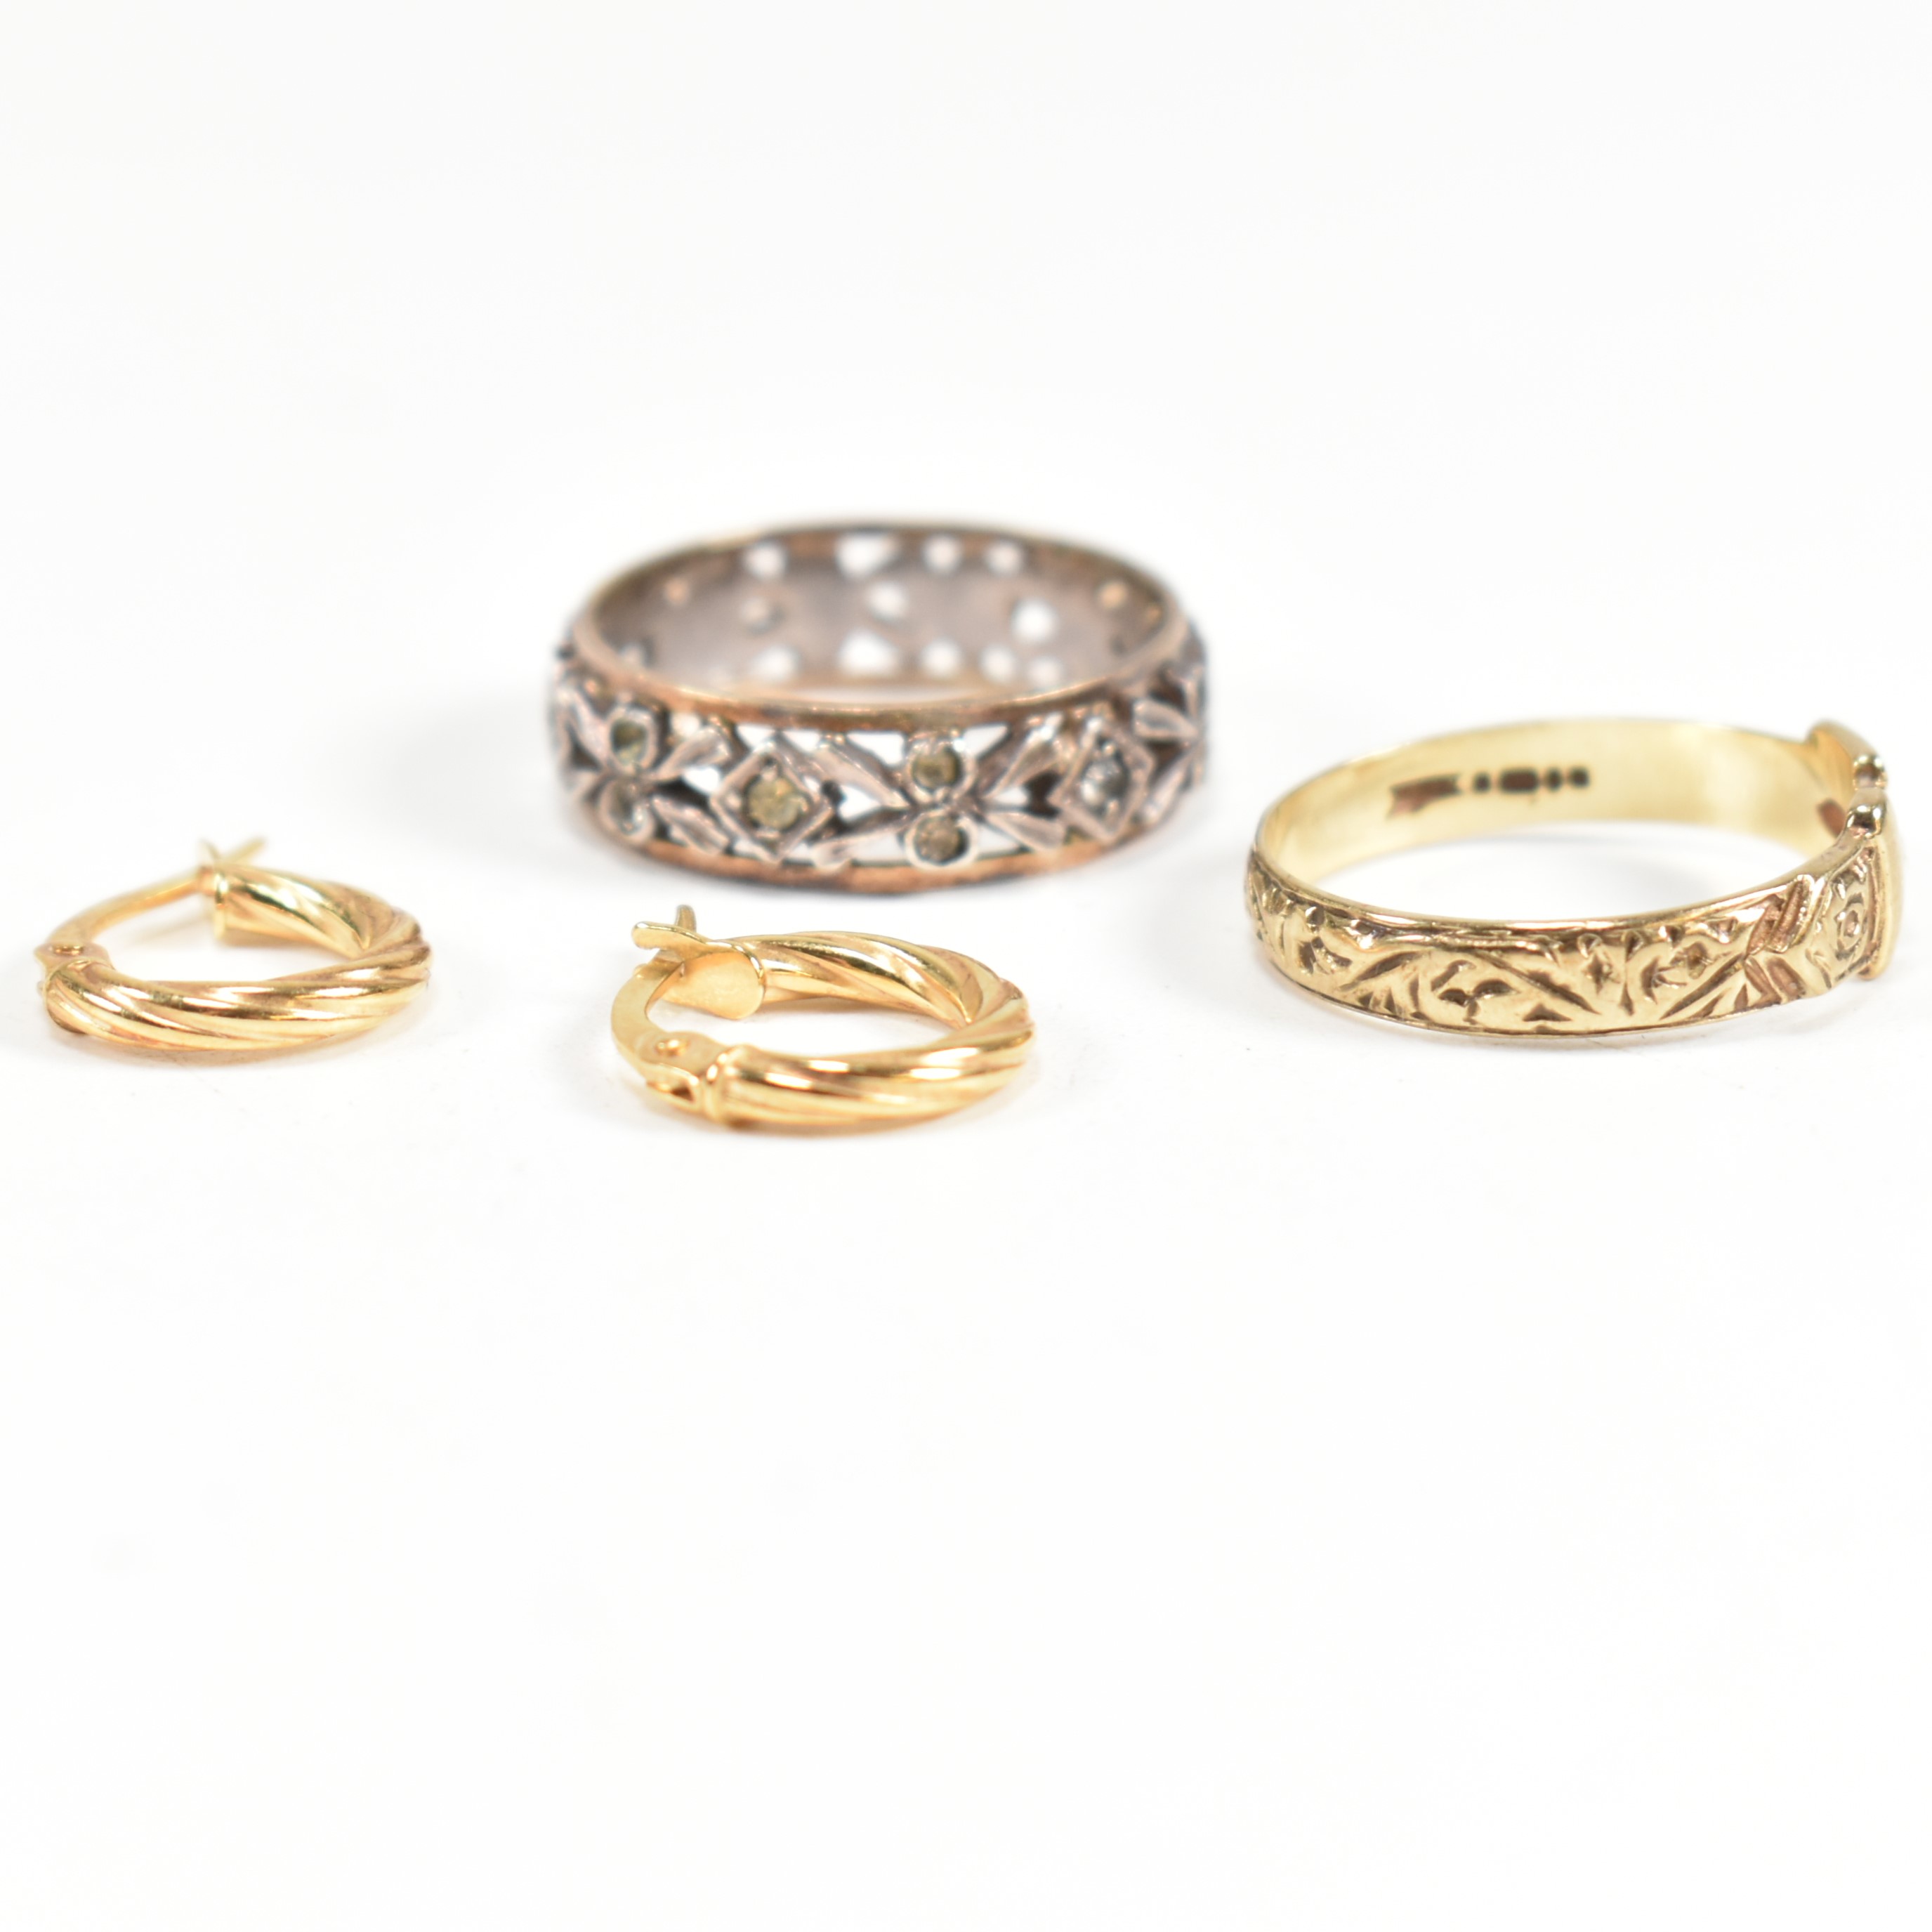 COLLECTION OF 9CT GOLD JEWELLERY INCLUDING GOLD & SILVER ETERNITY RING - Image 9 of 13